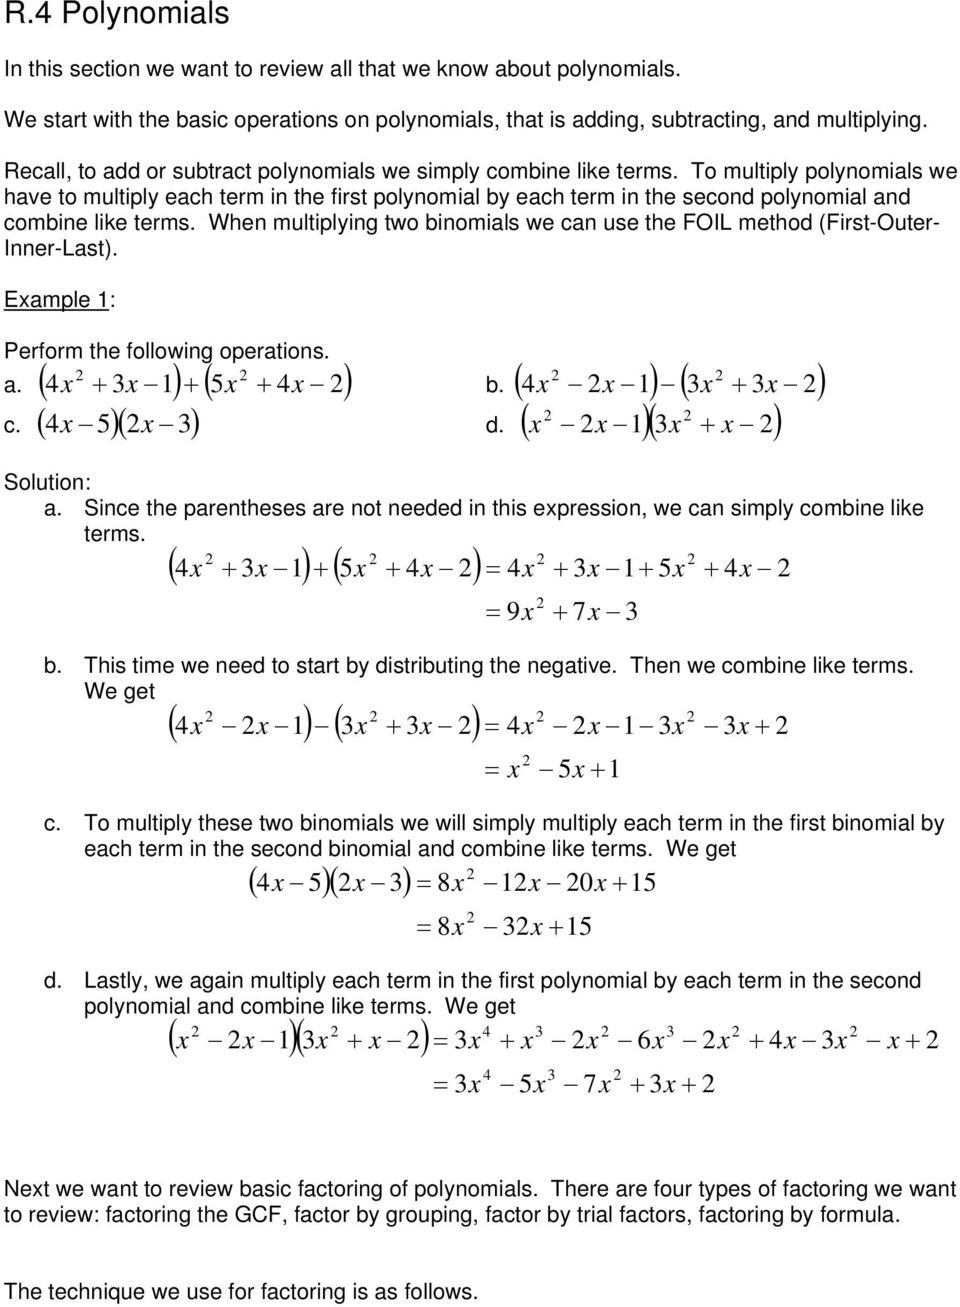 operations-with-polynomials-worksheet-db-excel